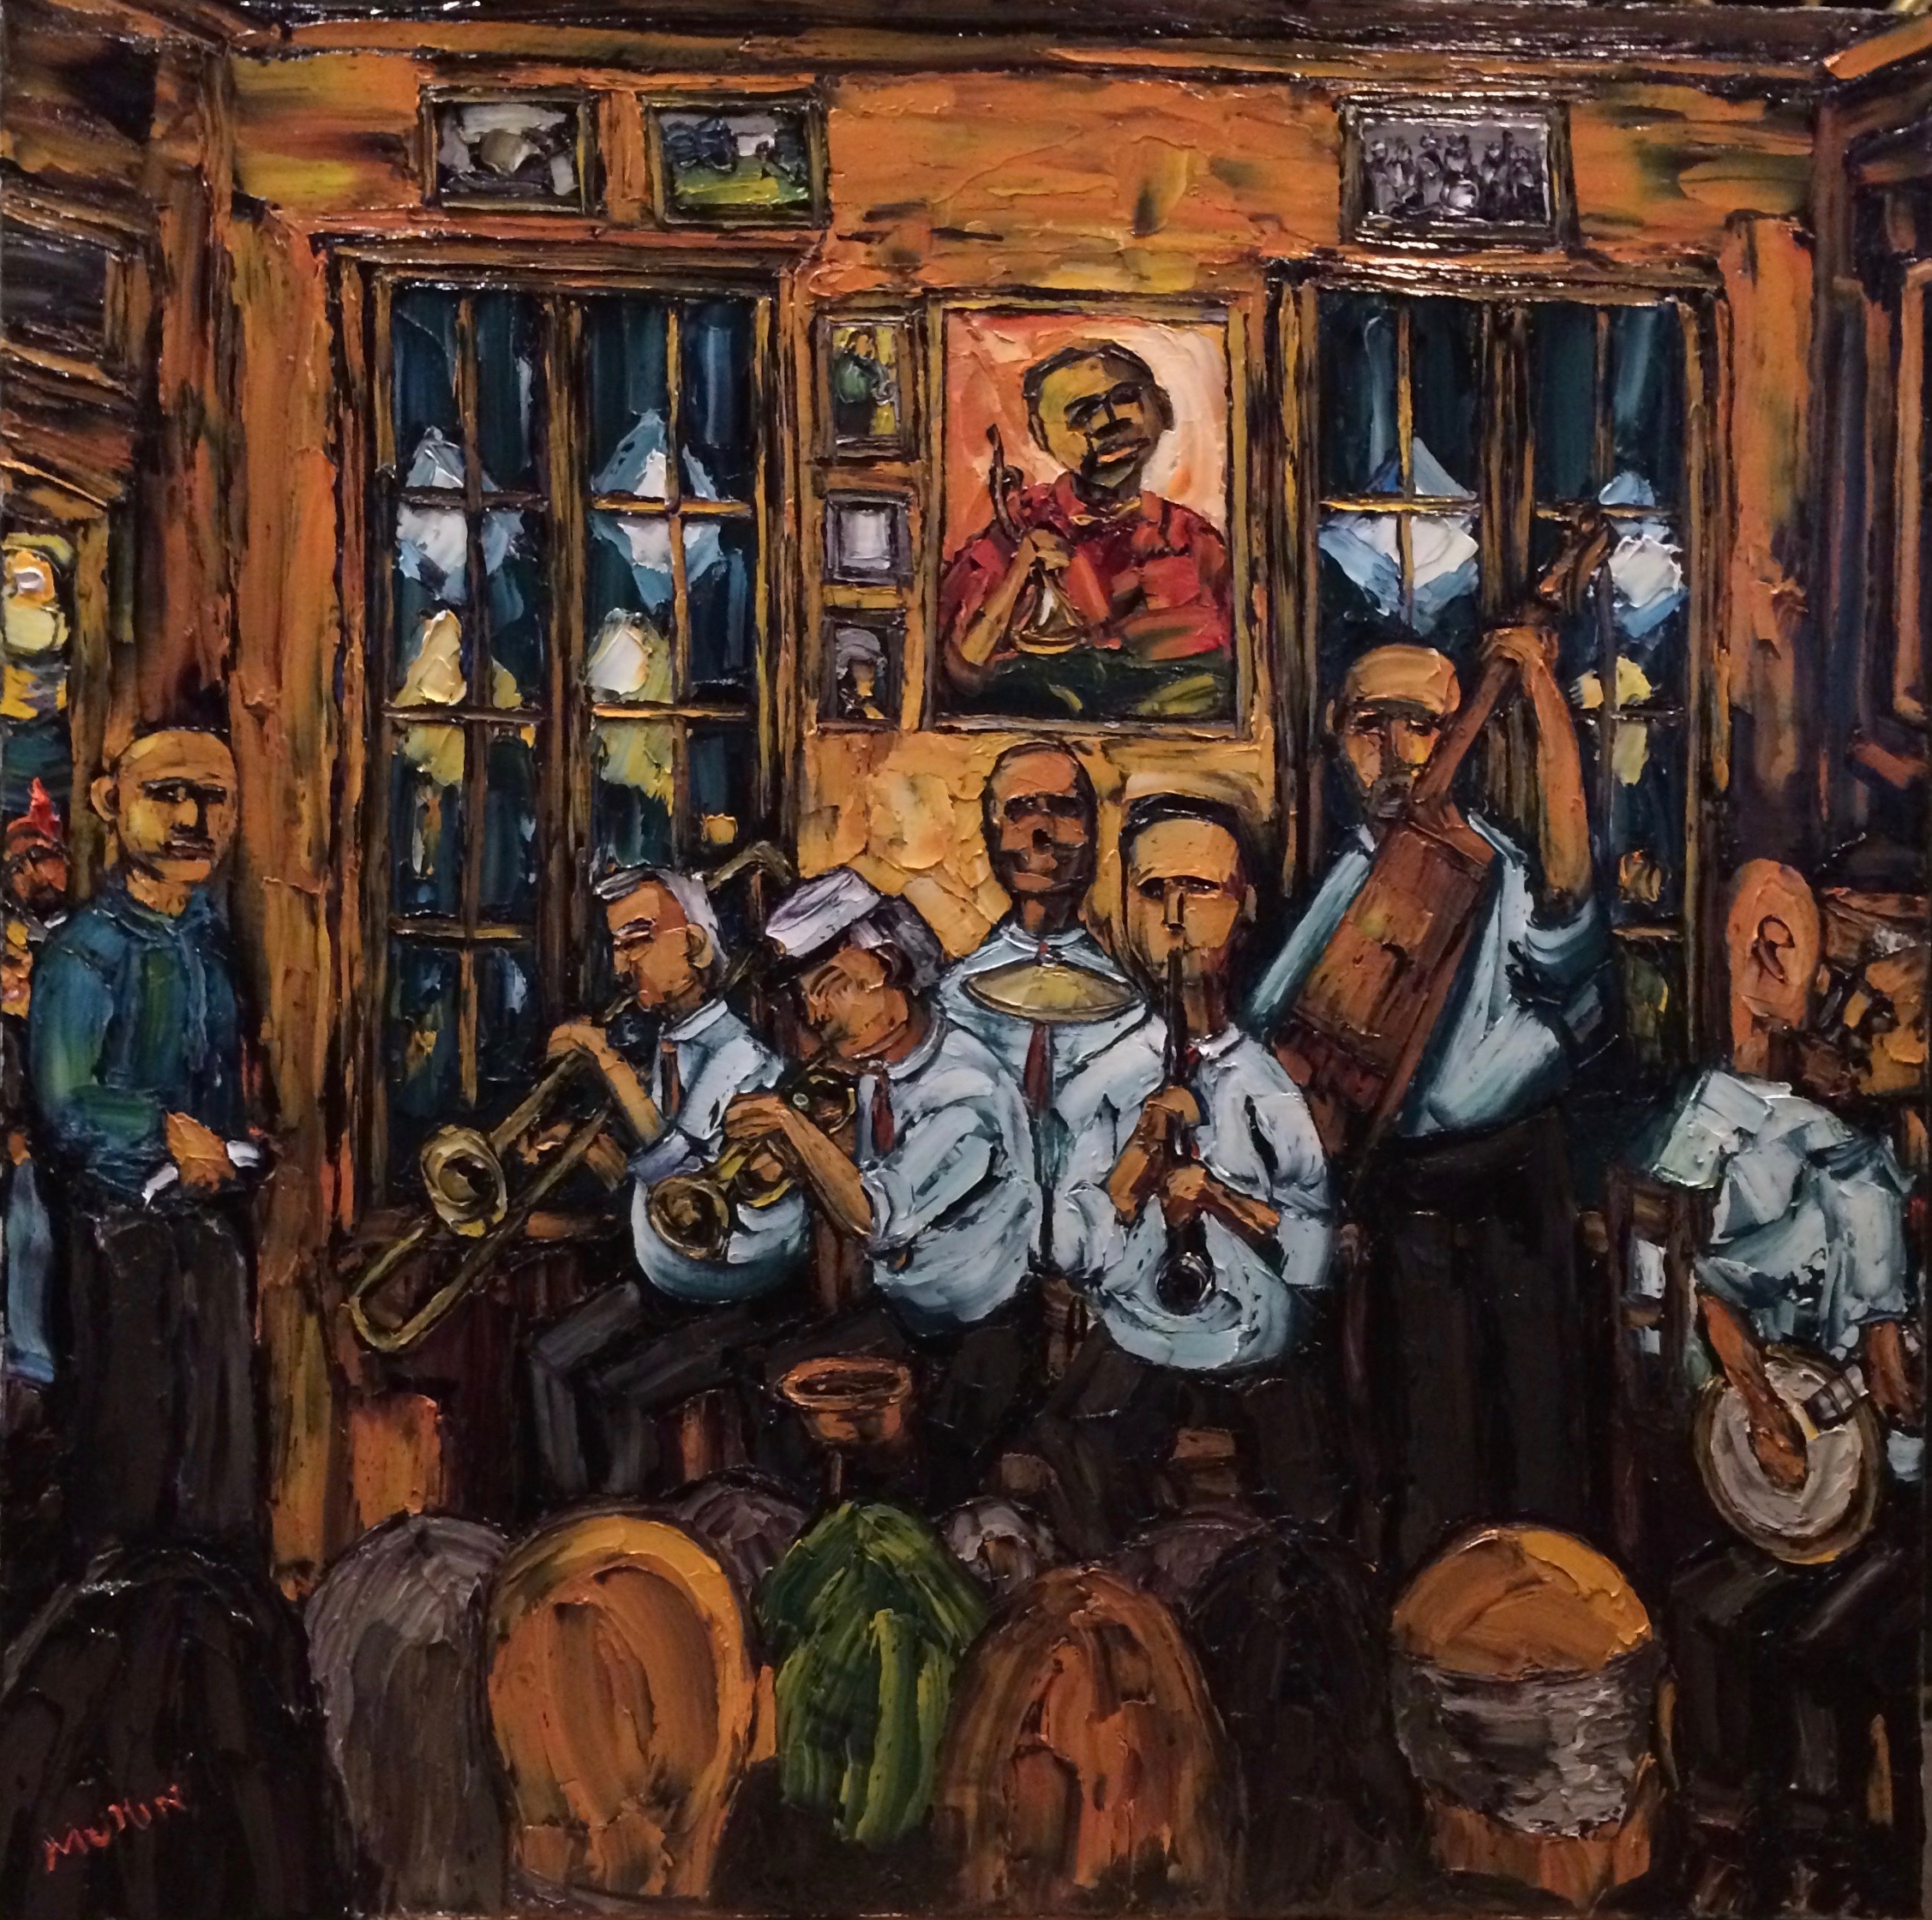 Marmalade or Sweet Emma’s Band (Preservation Hall, New Orleans). Oil on canvas, 30” x 30″.